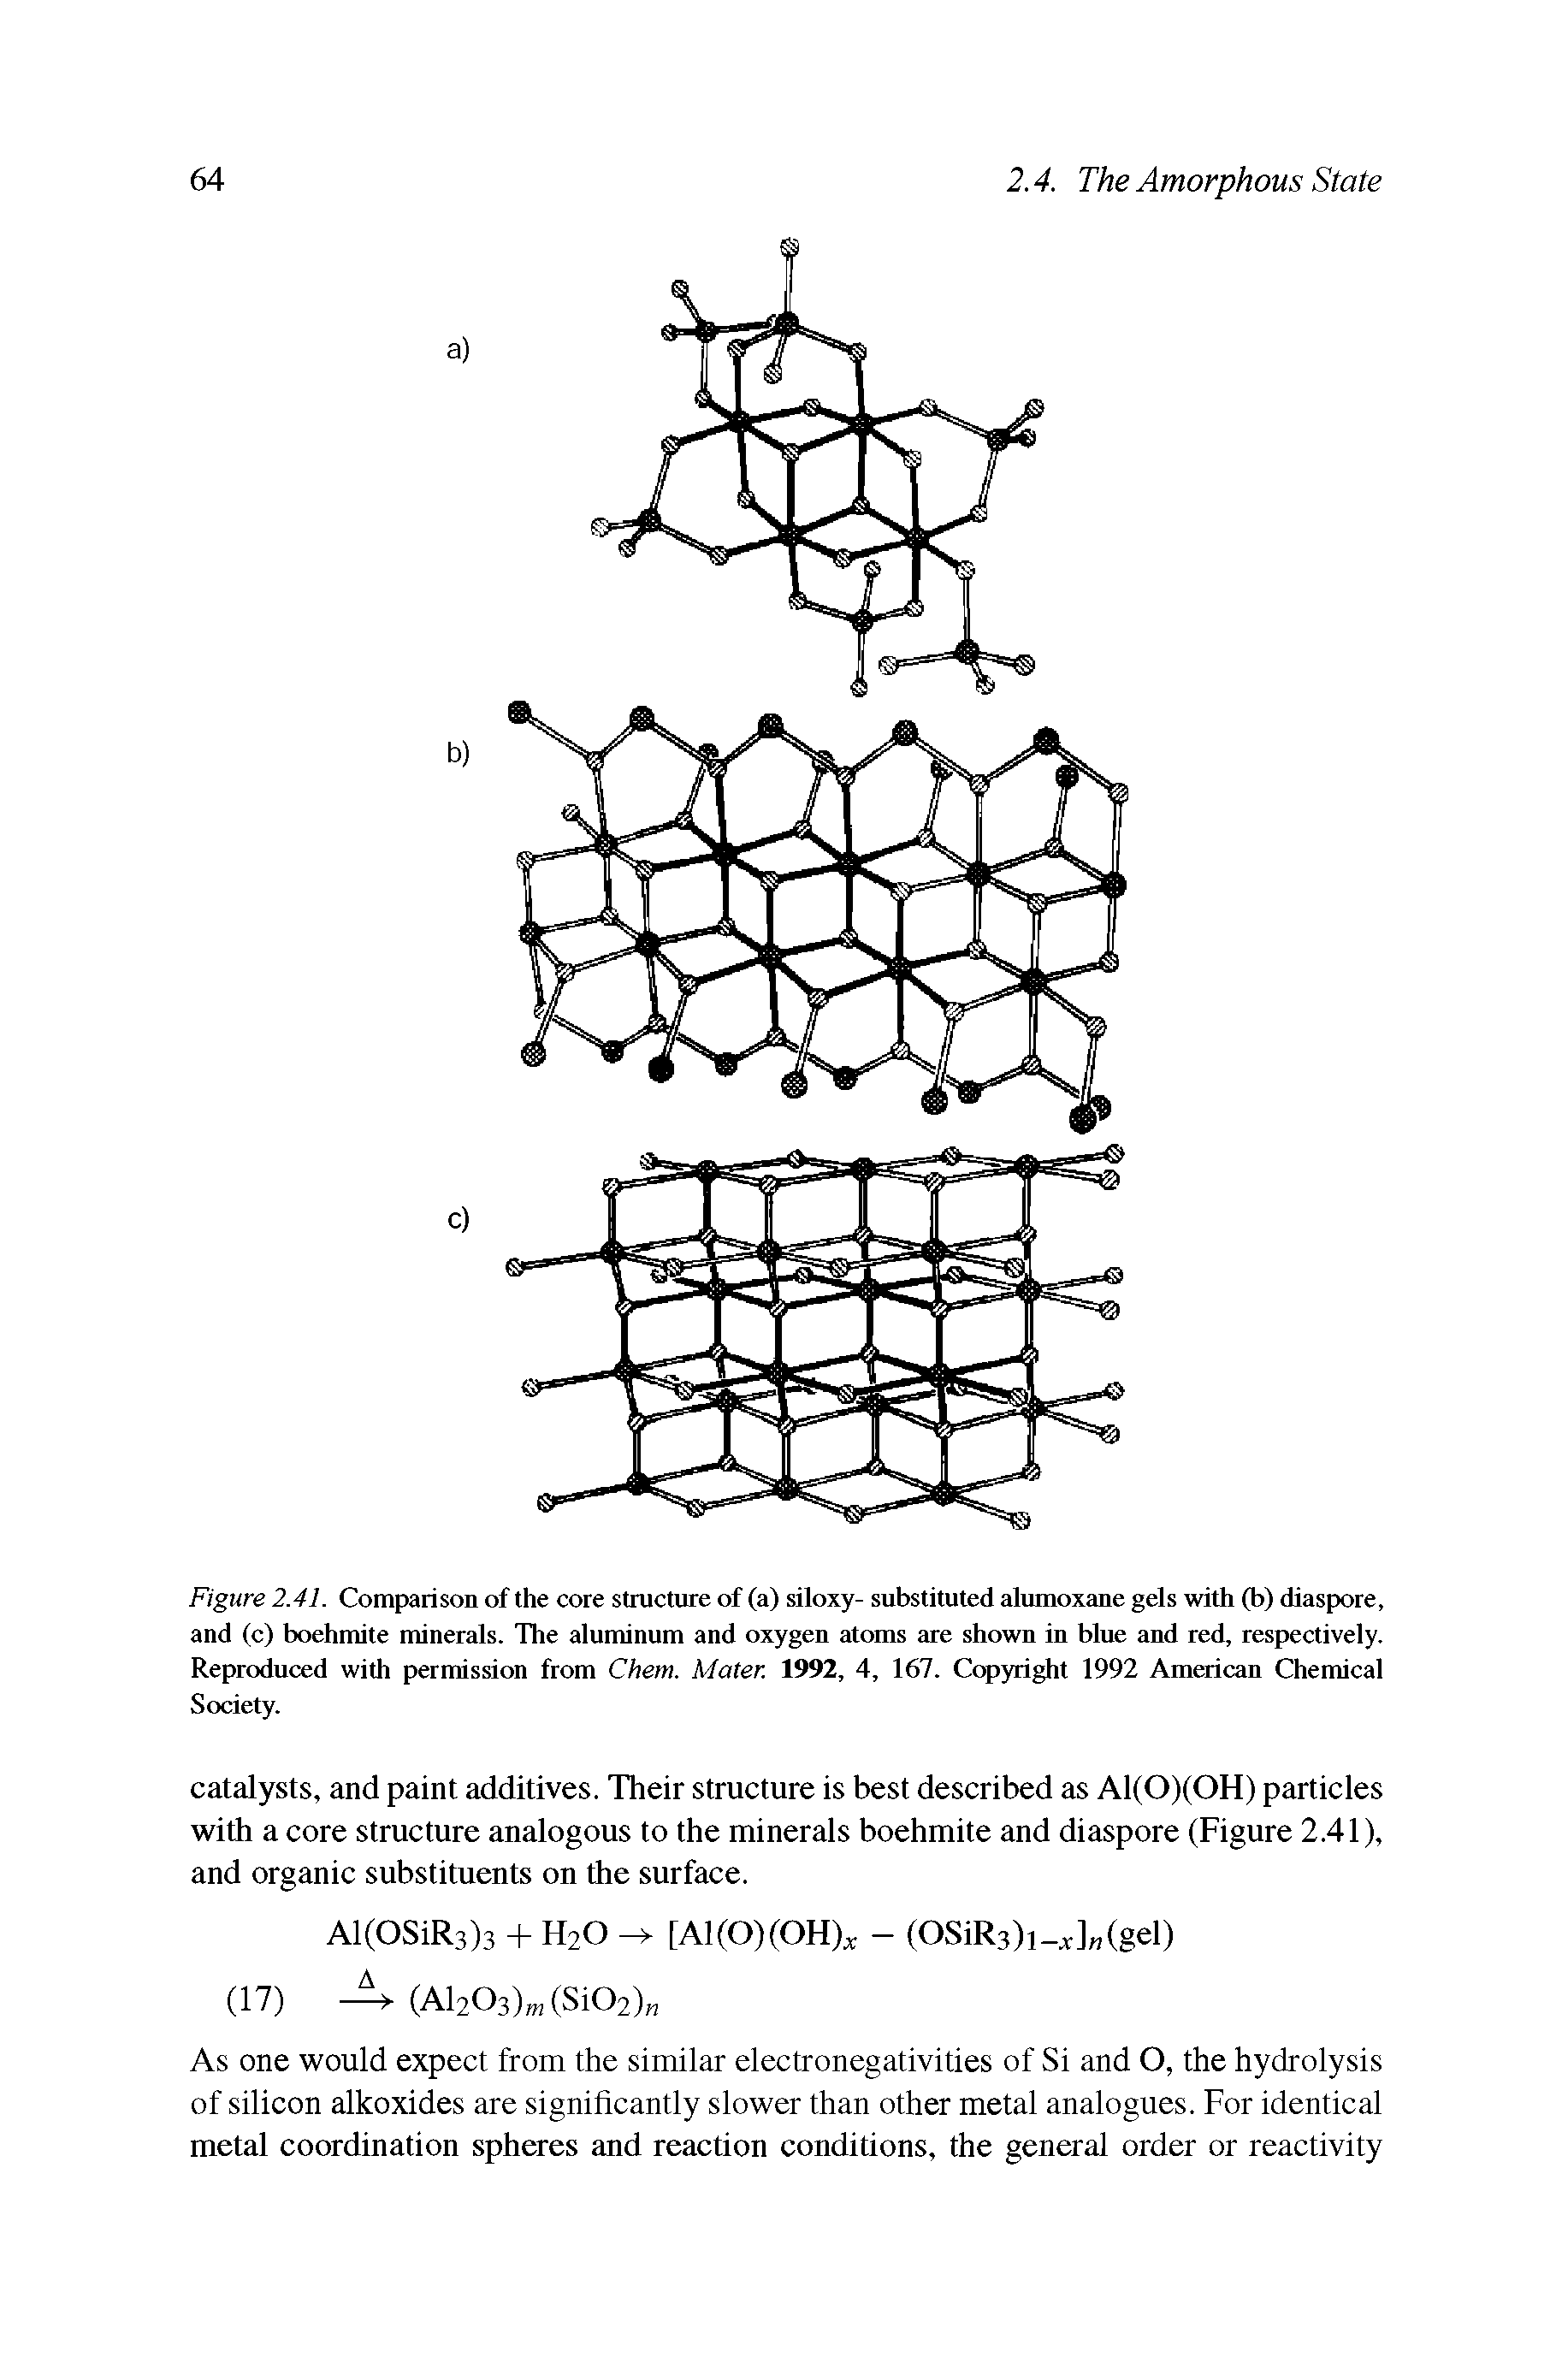 Figure 2.41. Comparison of the core structure of (a) siloxy- substituted alumoxane gels with (b) diaspore, and (c) boehmite minerals. The aluminum and oxygen atoms are shown in blue and red, respectively. Reproduced with permission from Chem. Mater. 1992, 4, 167. Copyright 1992 American Chemical Society.